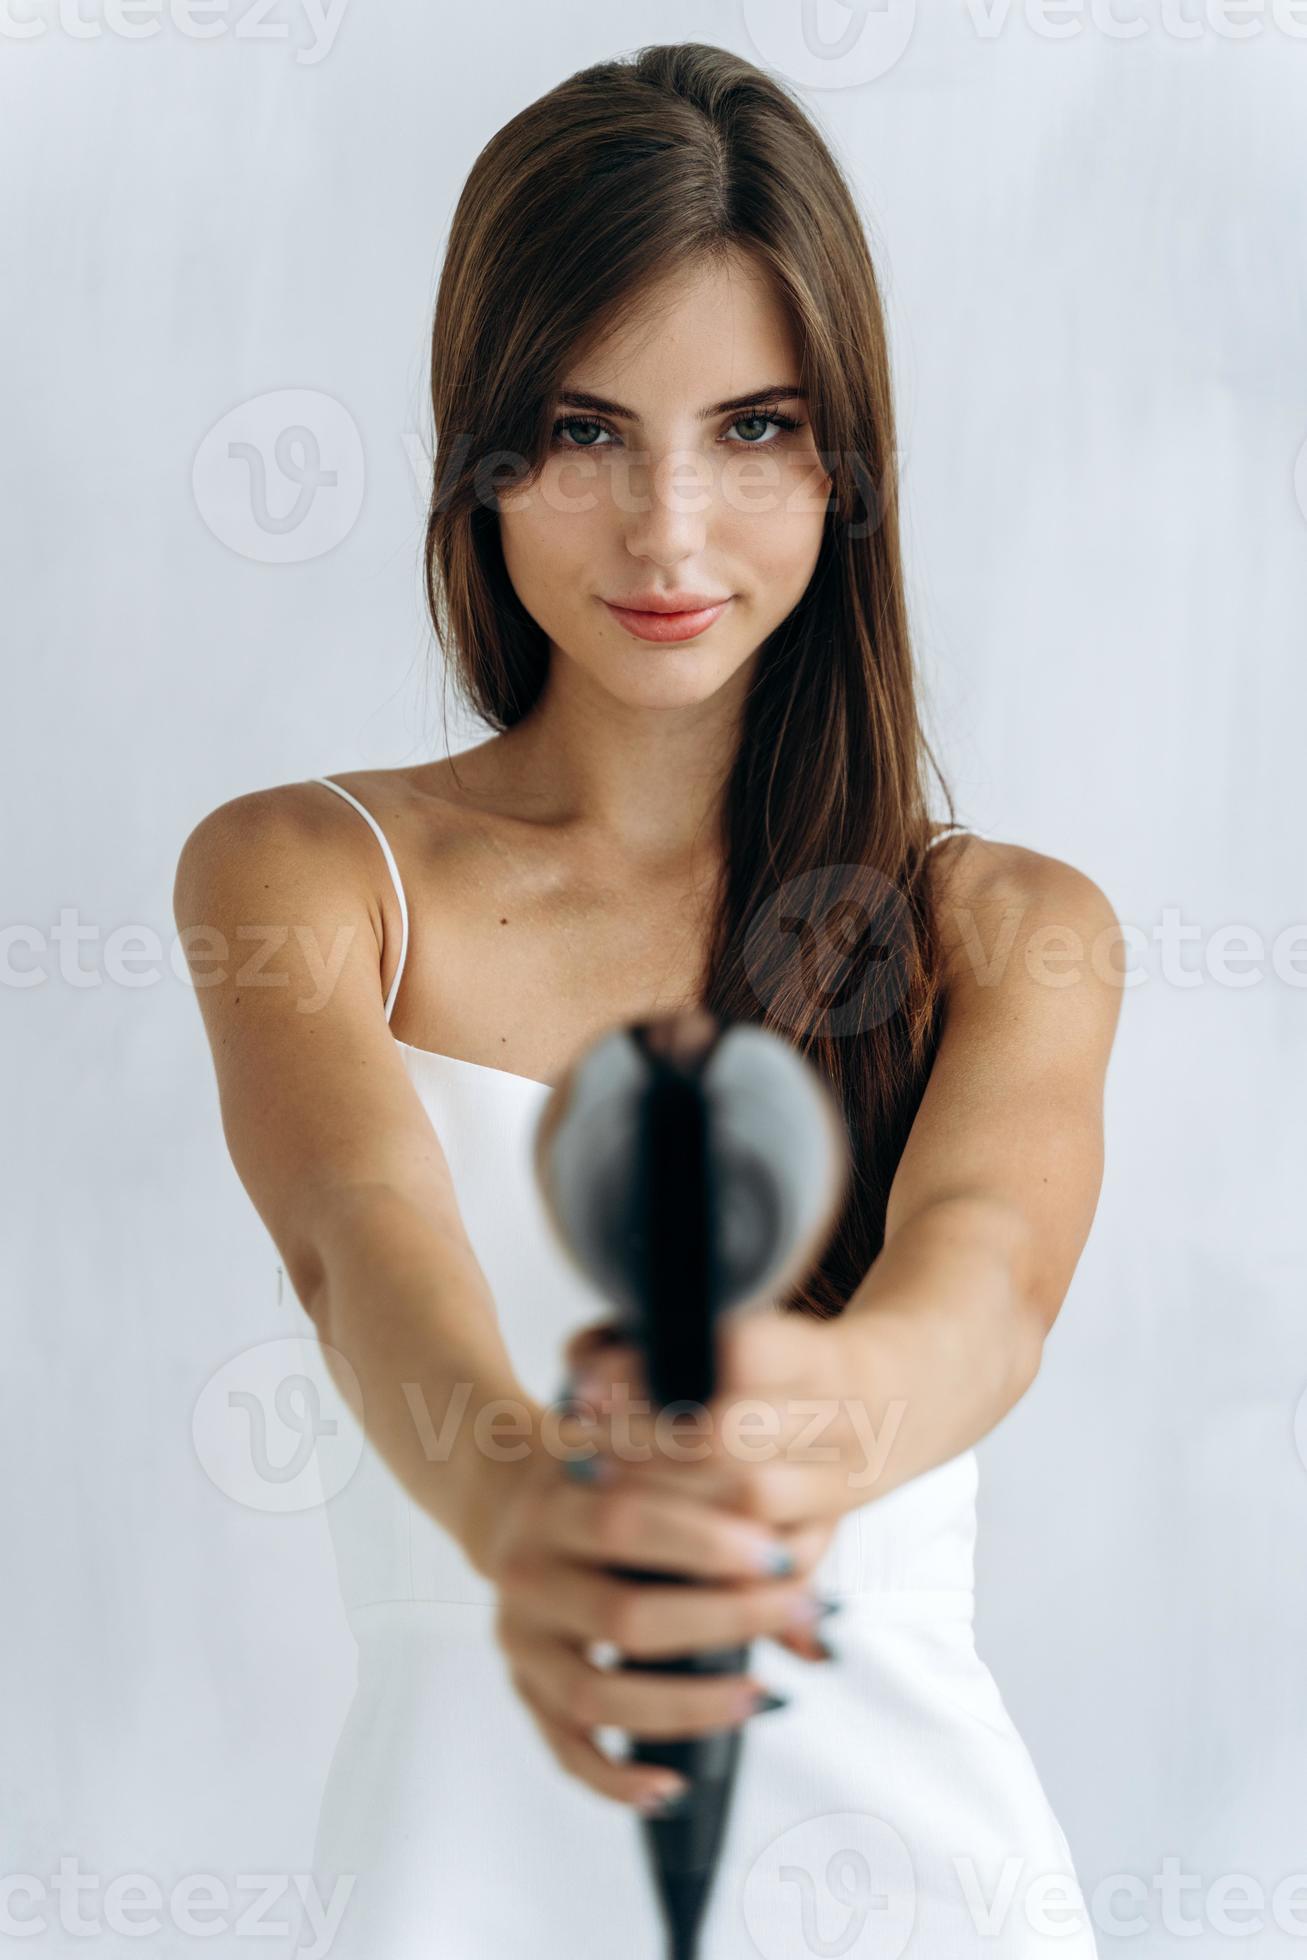 At gunpoint. Beautiful happy woman drying healthy long straight hair using  hair dryer. Portrait of attractive girl with brunette hair holding  hairdryer like a gun. Hairstyle and hairdressing concept 3490300 Stock Photo